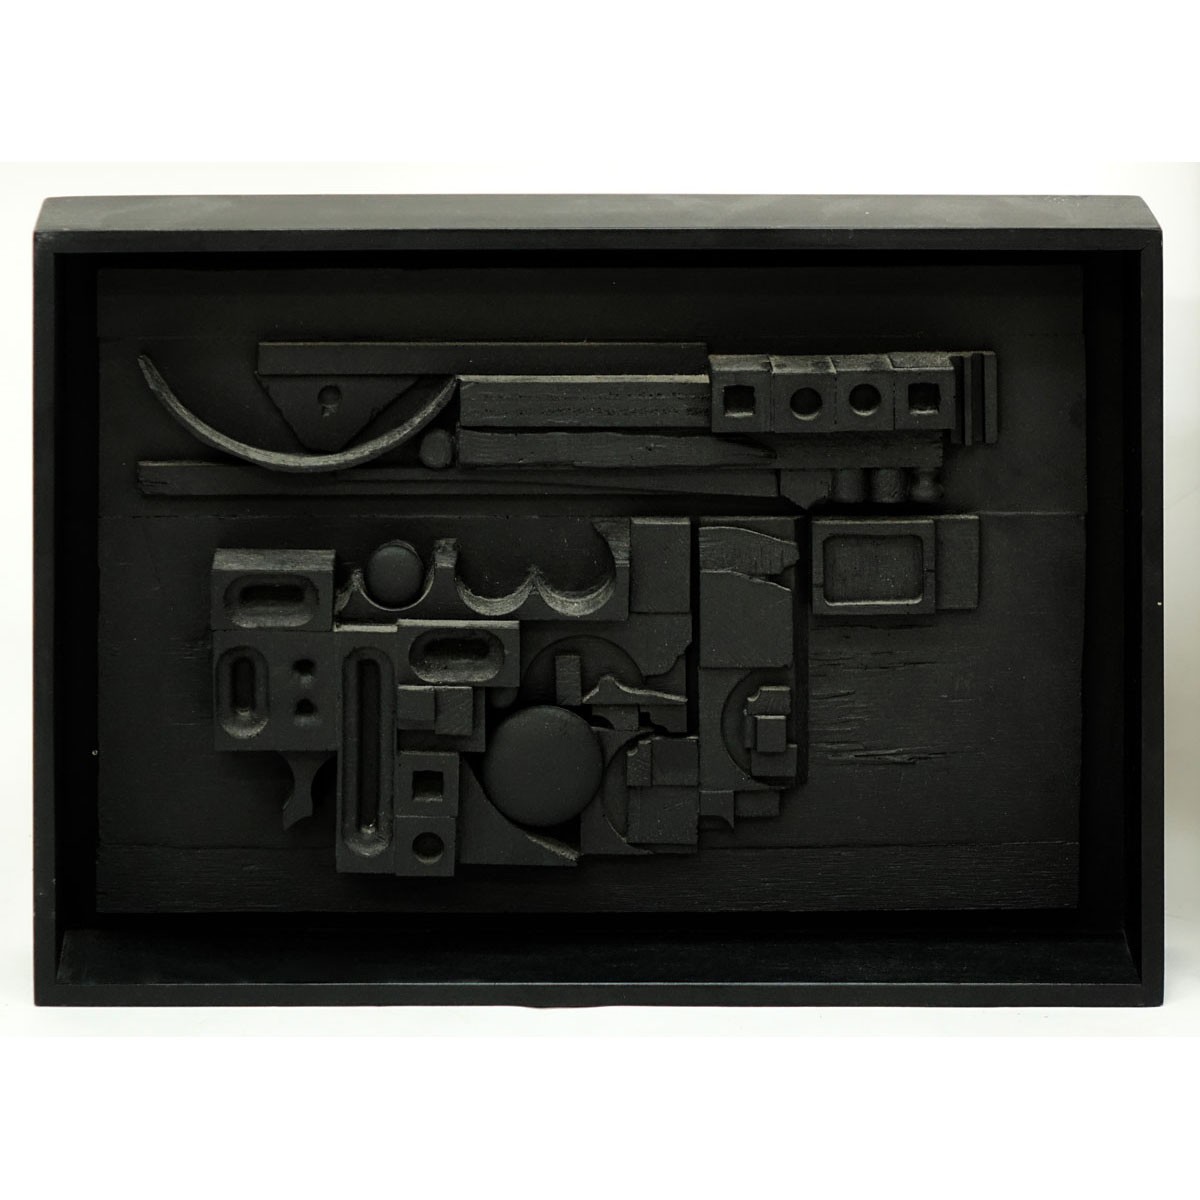 Louise Nevelson, Russian/American (1899 - 1988) Cast polyester resin "Sun-Set, 1981" Tag signed and numbered 44/125 en verso. Published by Pace Editions Inc.